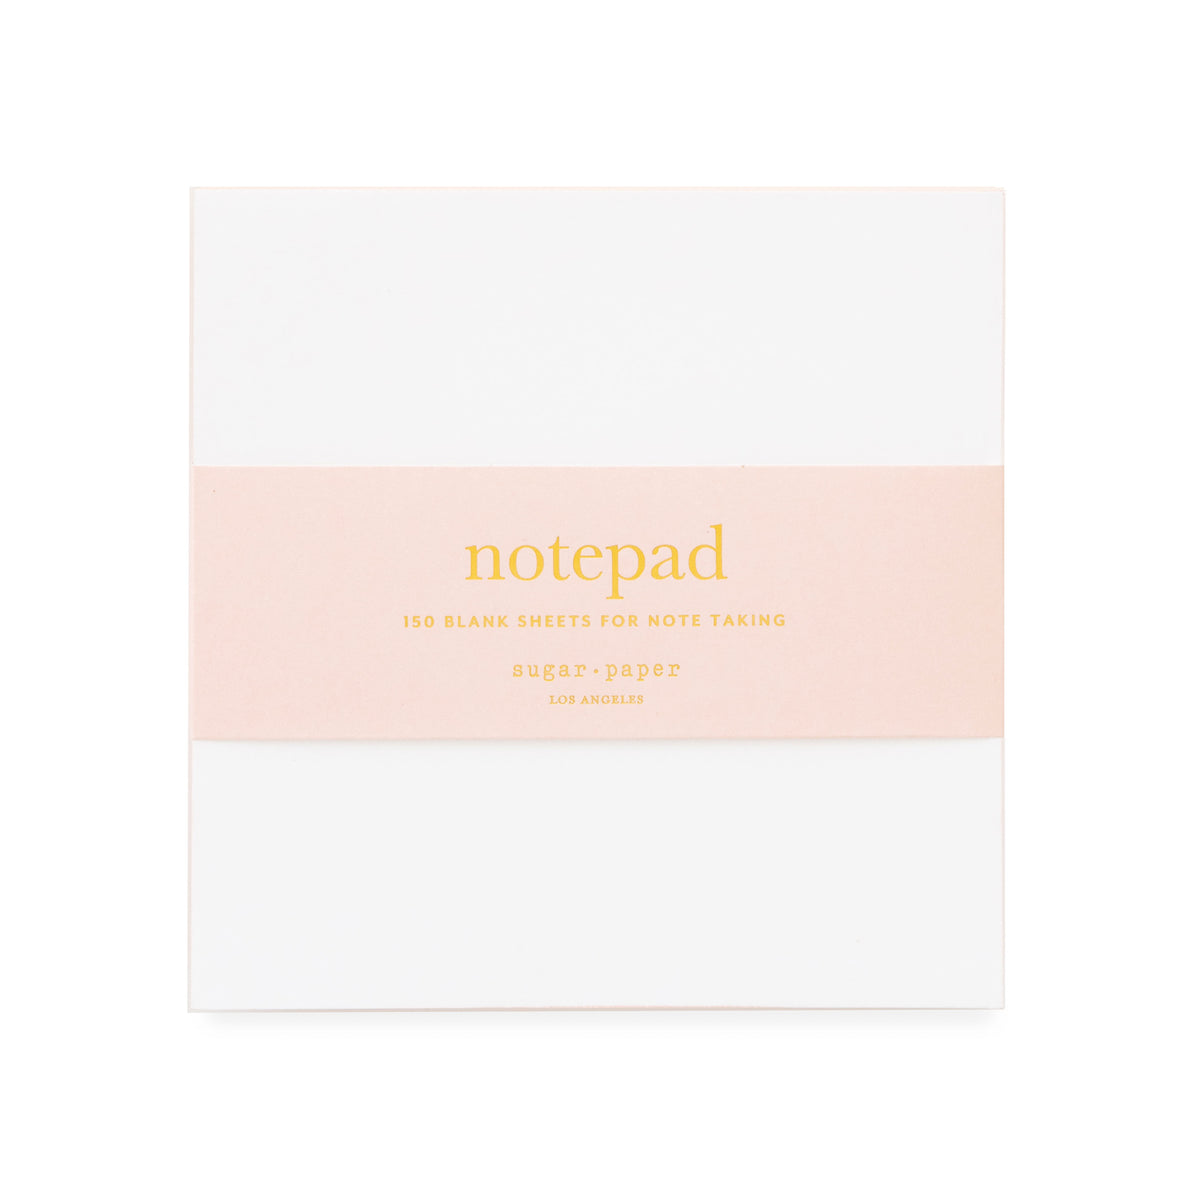 Pale Pink painted note pad